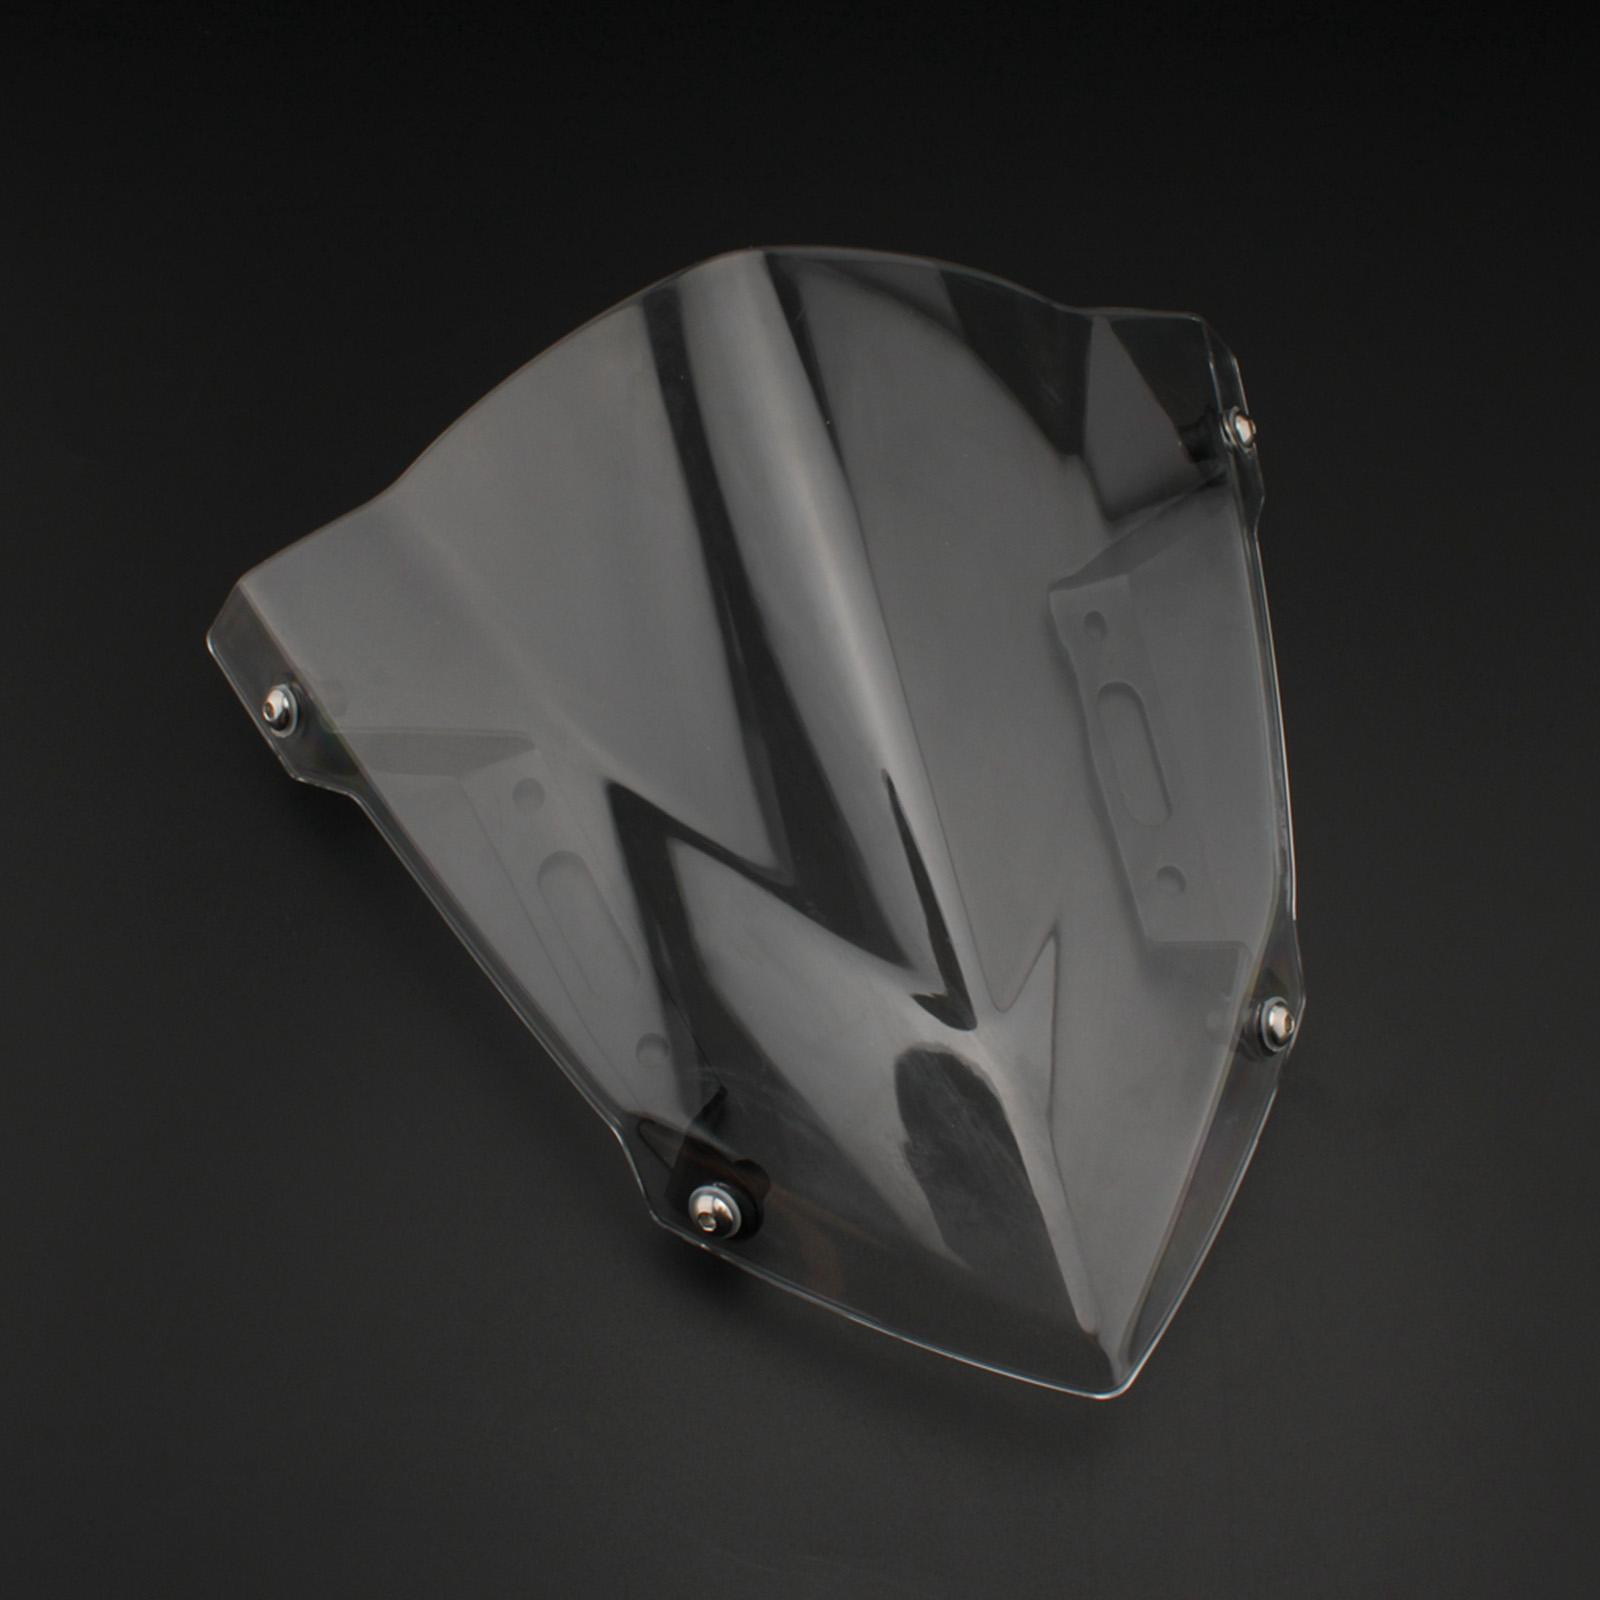 Wind deflector, for  2014-20 motorcycle accessories, - clear